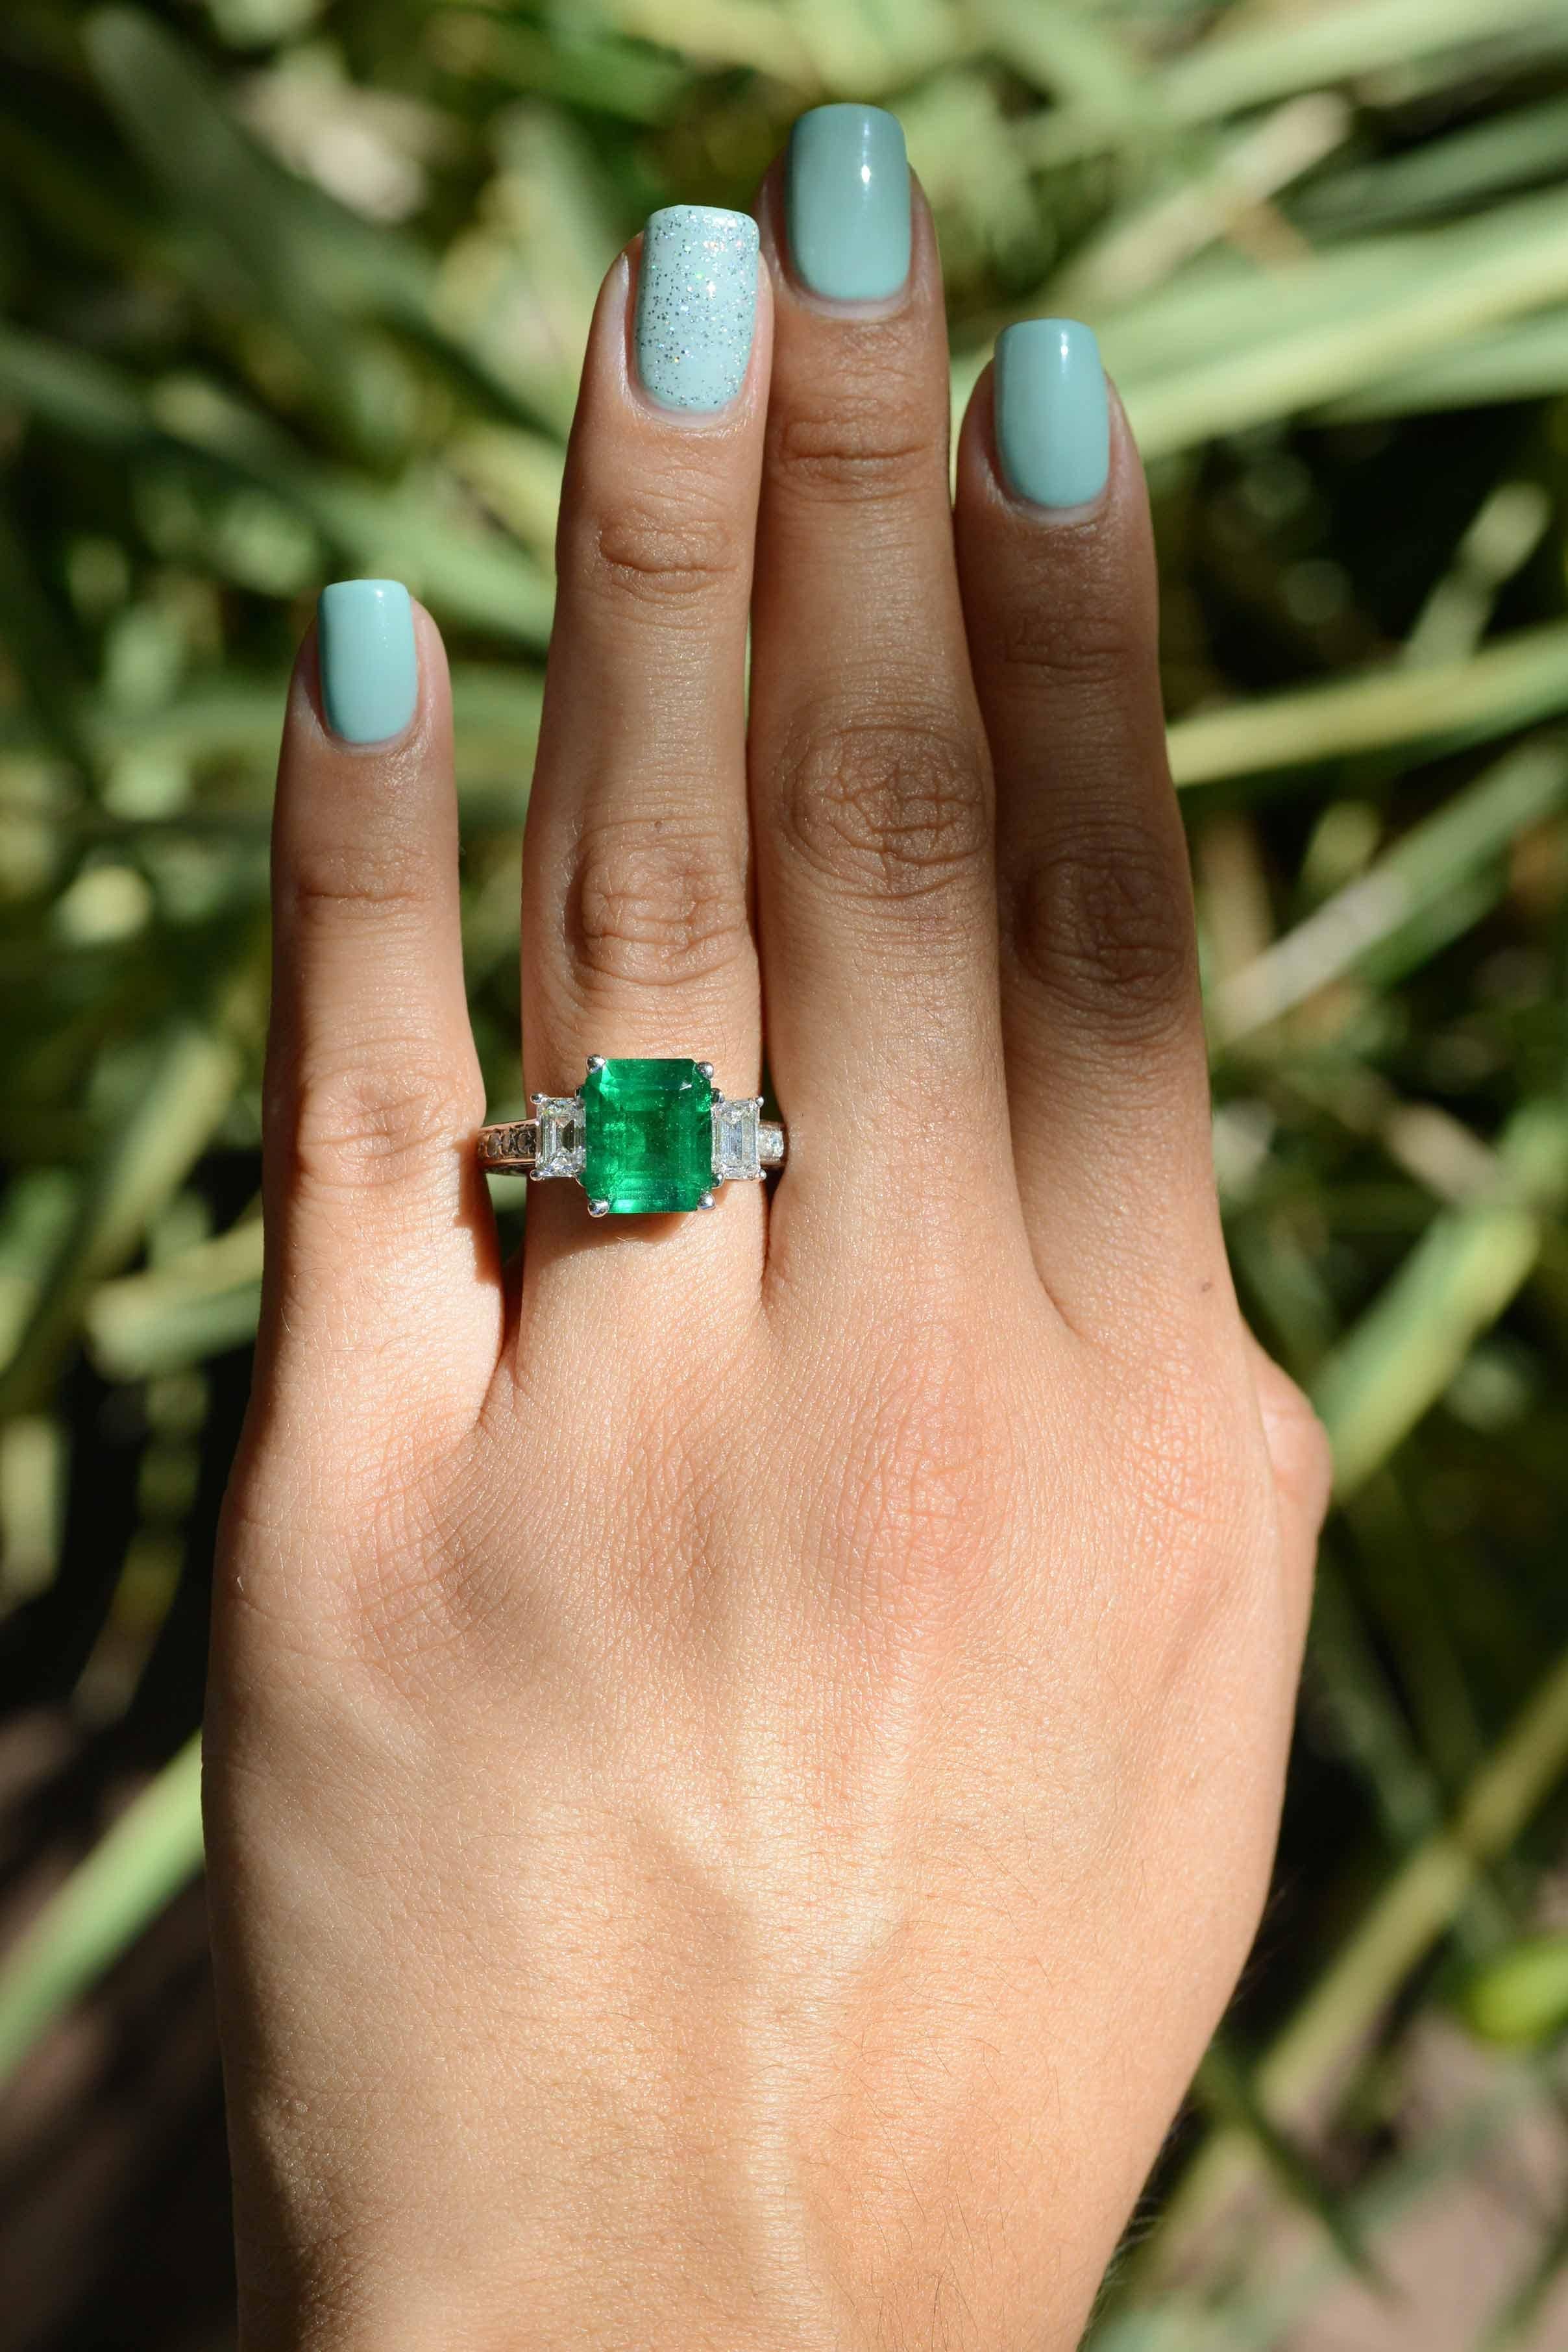 A contemporary emerald engagement eternity ring. Certified by GIA, the Gemological Institute of America as 4.13 carats. The report stating natural emerald with no oil treatment making this fabulous gemstone even more of a rarity. Set in 18k white